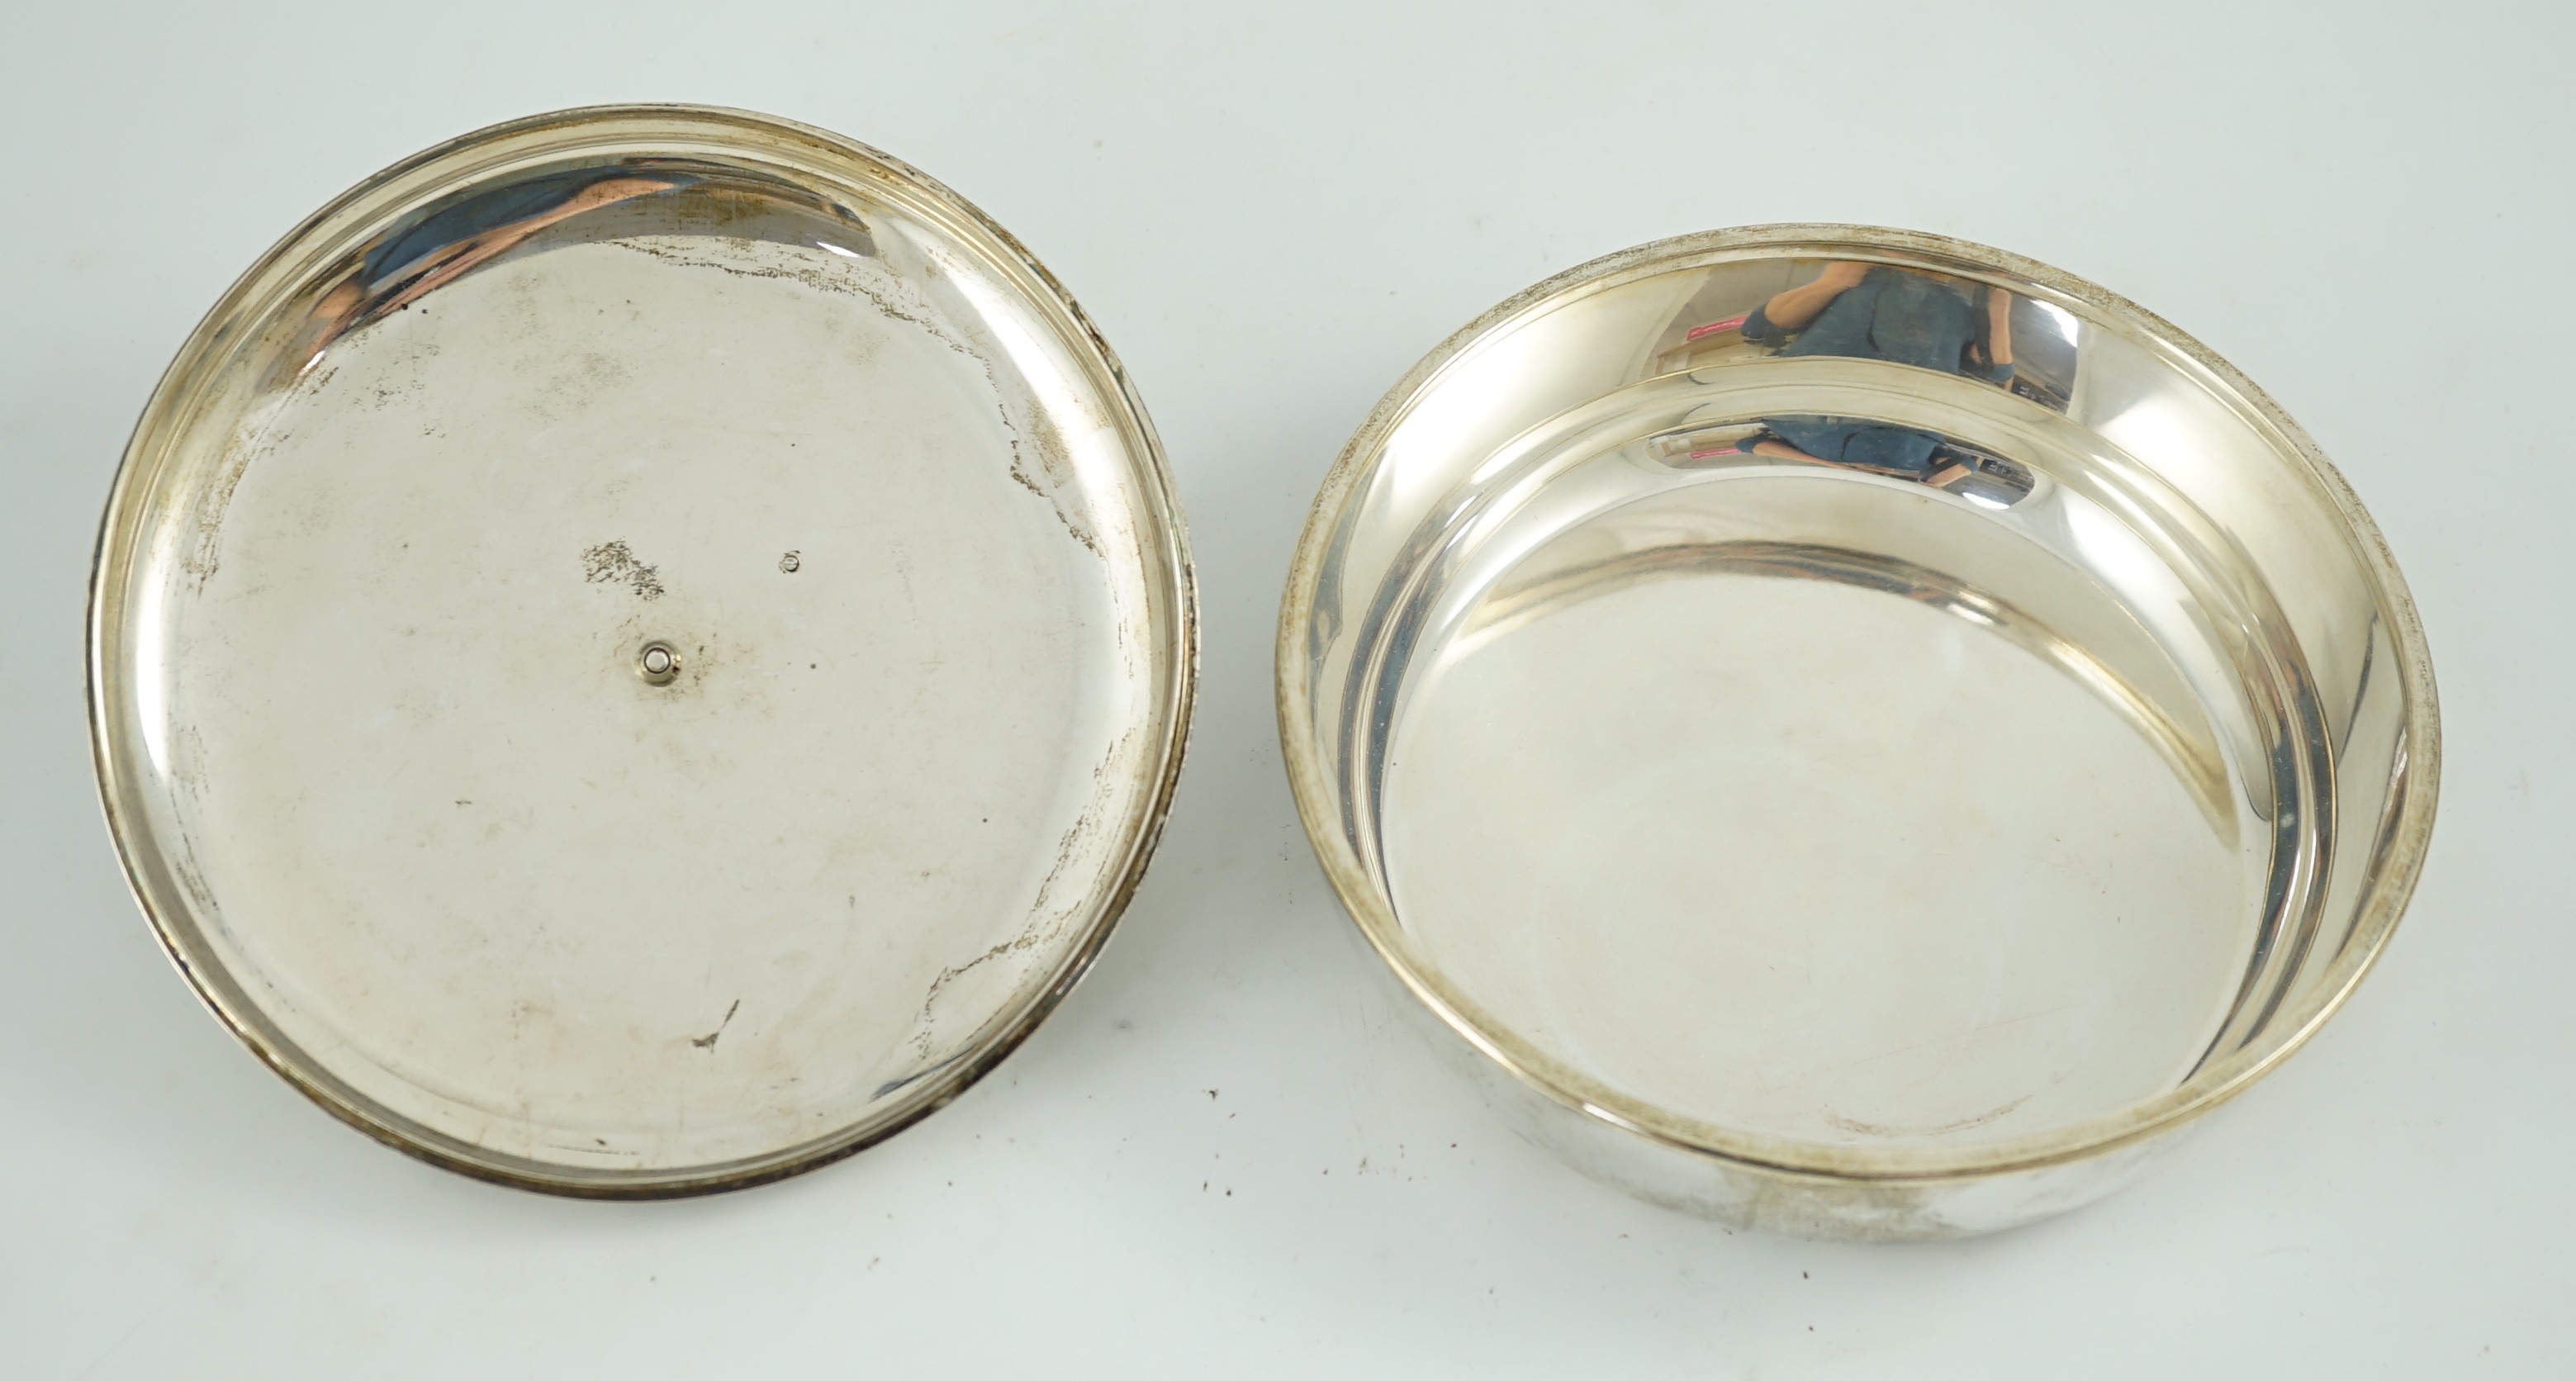 A 20th century French Emile Puiforcat for Cartier 950 standard silver bowl and cover